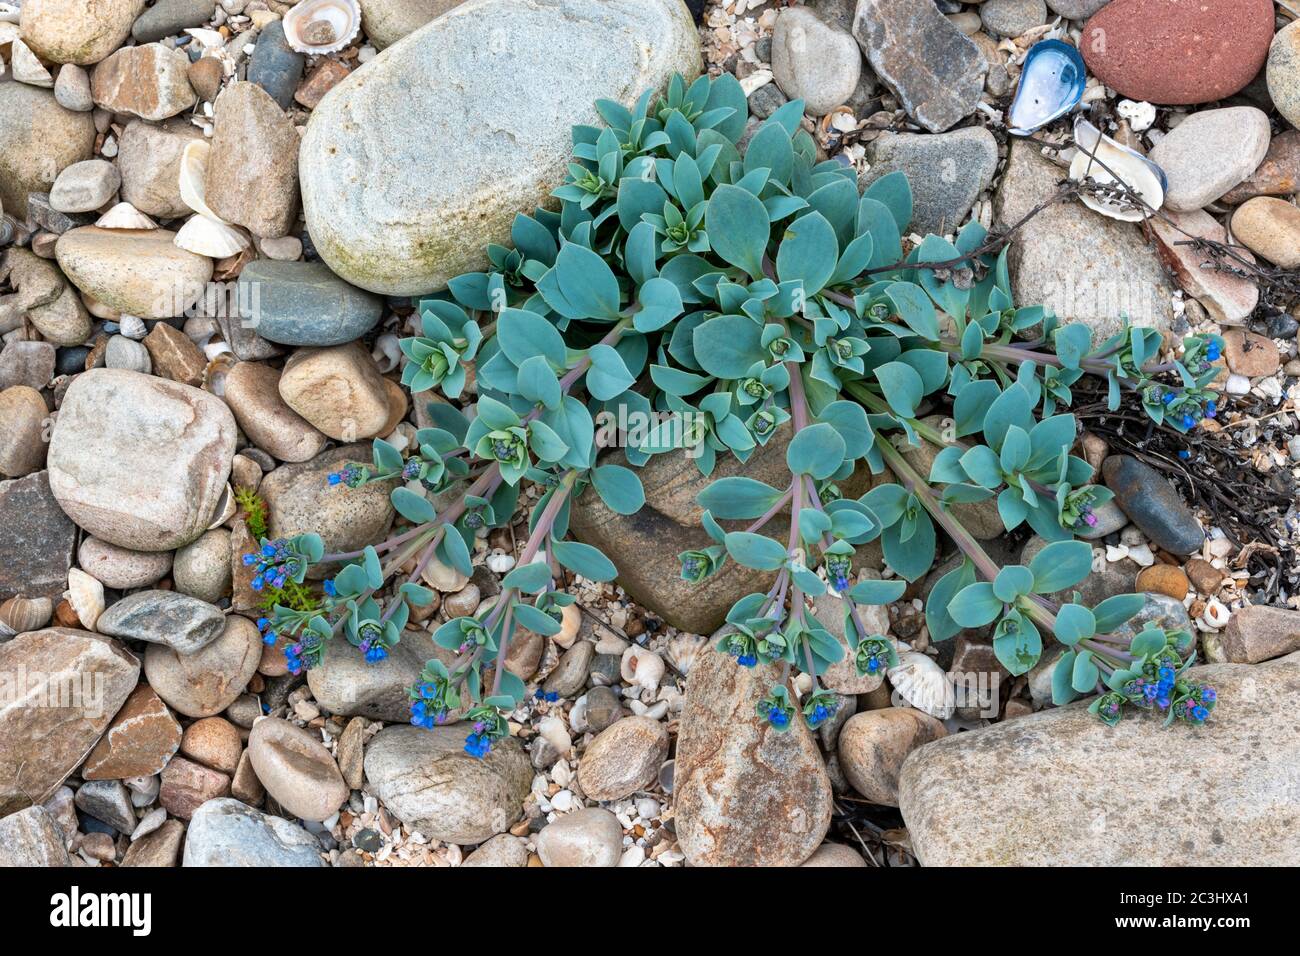 OYSTERPLANT Mertensia maritima A SMALL BLUE GREEN PLANT AND STEMS WITH BLUE FLOWERS ON A SEASHELL AND ROCK COVERED BEACH MORAY COAST SCOTLAND Stock Photo